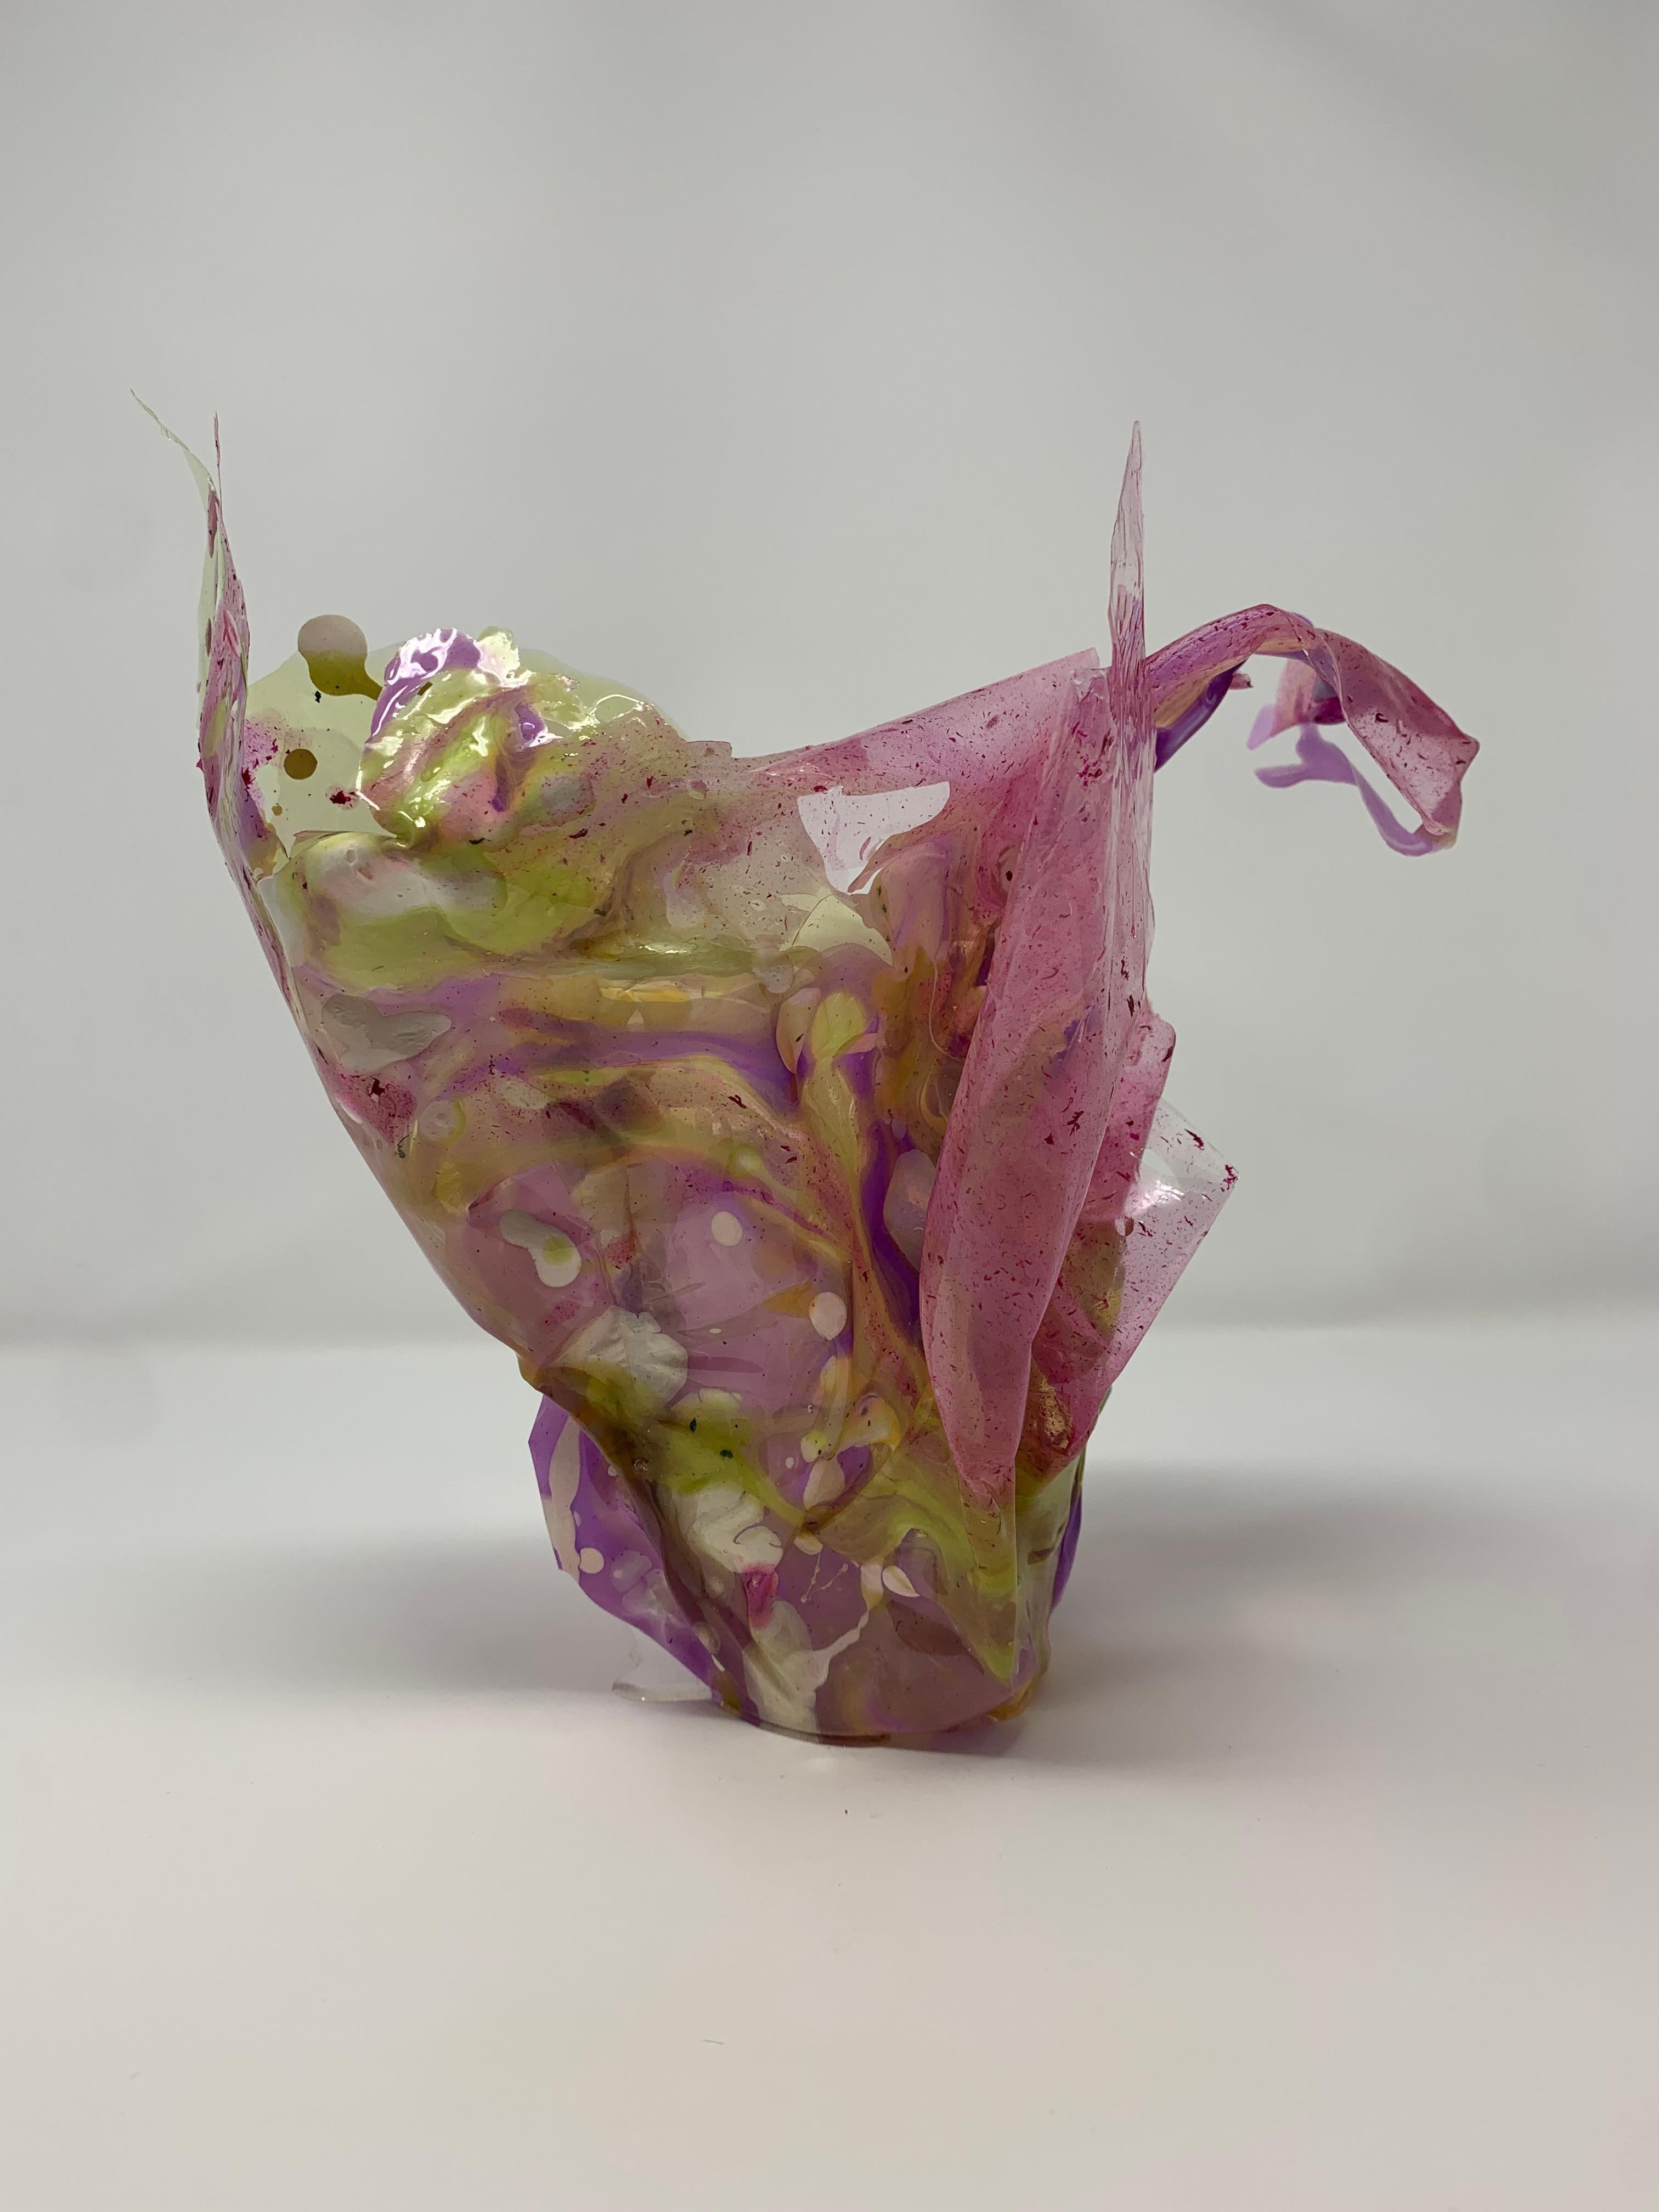 Sculptural Vessel made from biomaterials.